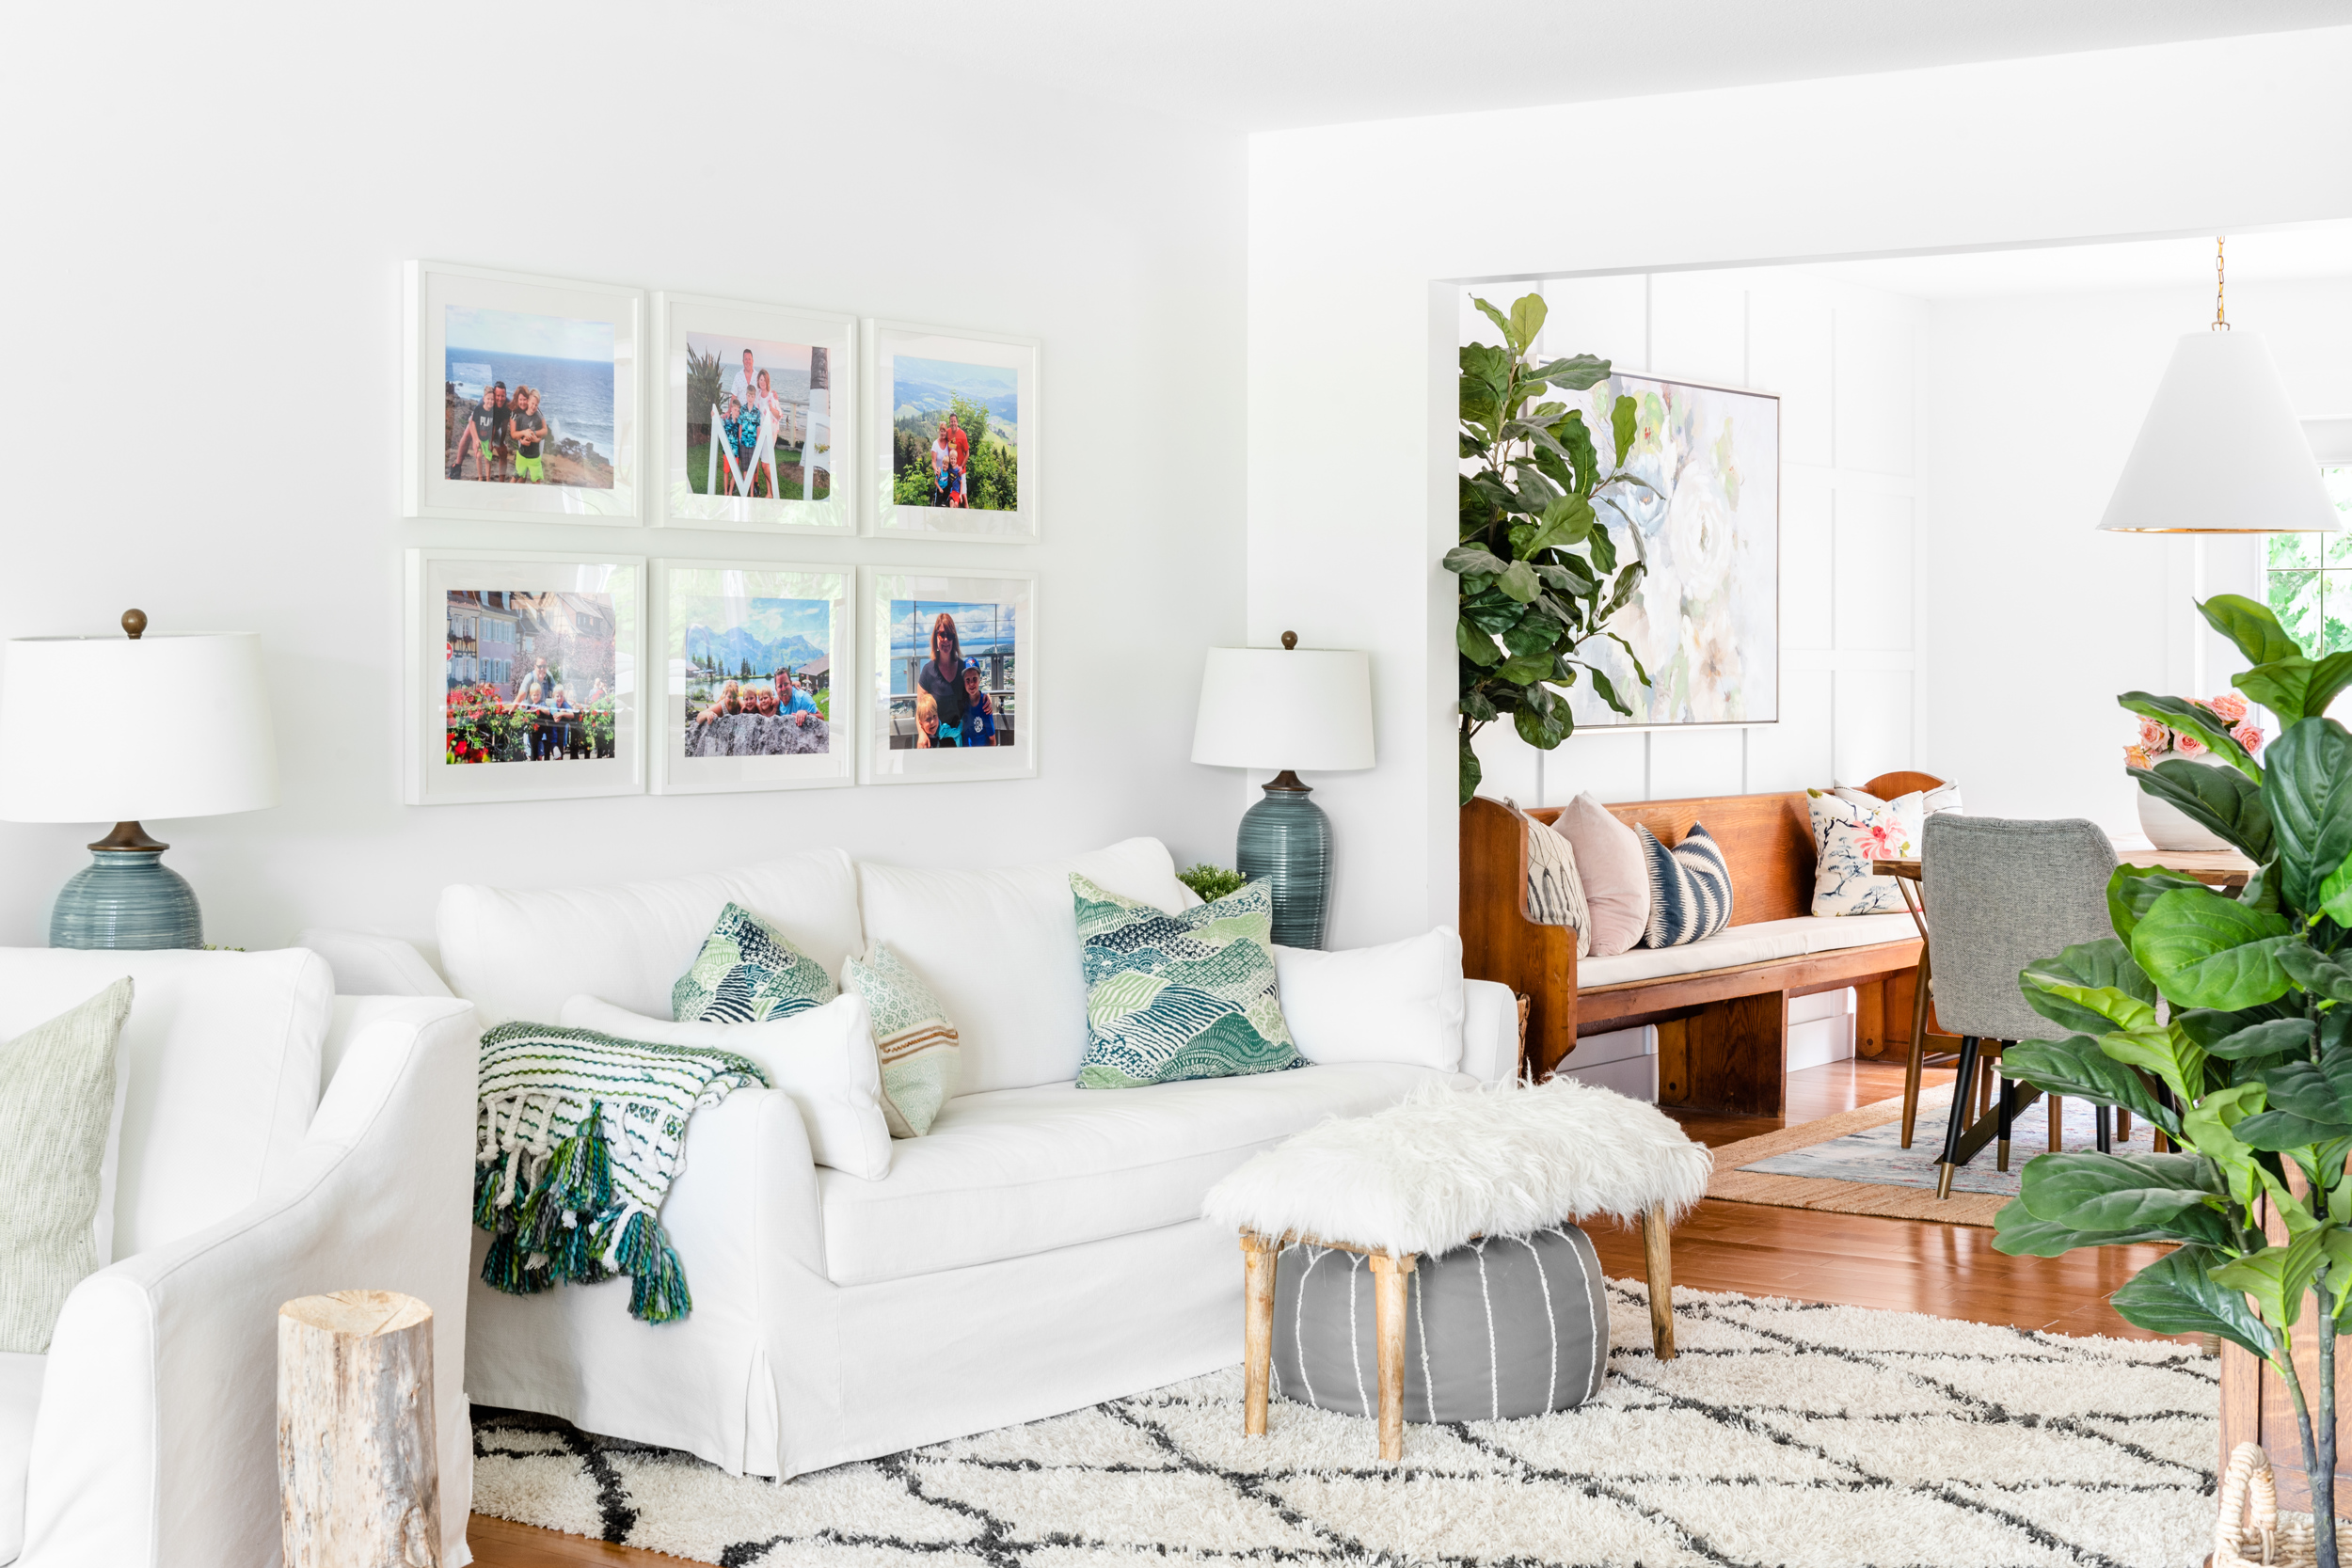 A family room space with a white slipcovered Ikea Farlov sofa